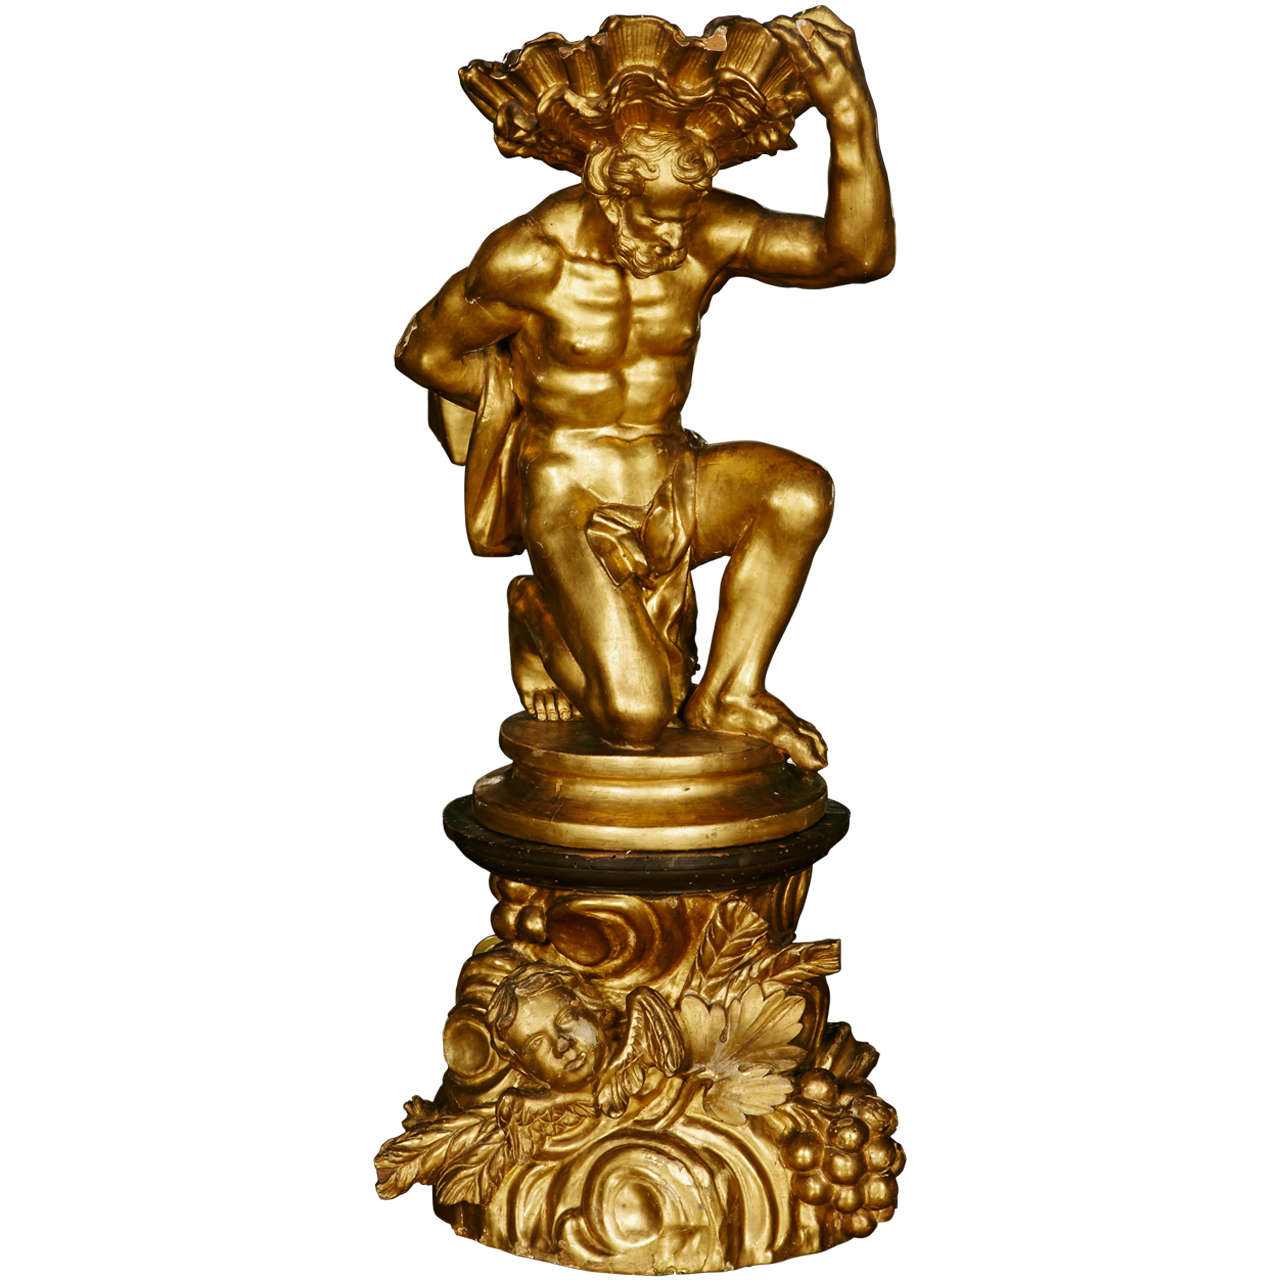 Giltwood Sculpture, Early 18th Century